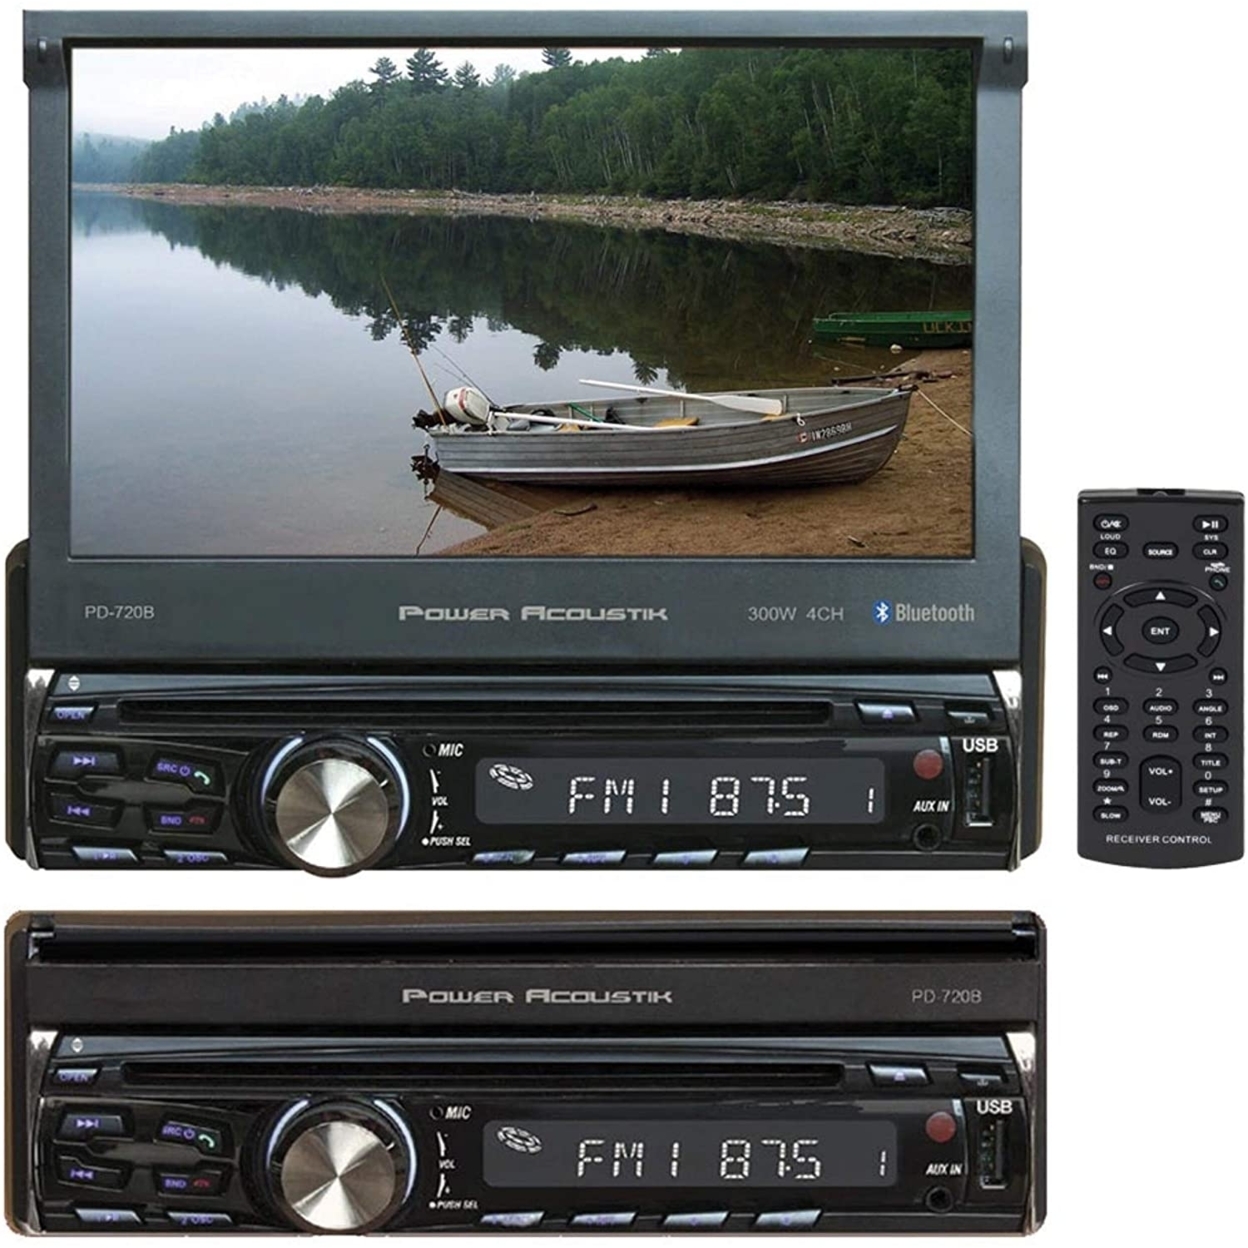 New Power Acoustik PD-720B Single DIN With 7-inch Motorized LCD Touchscreen, DVD, CD/MP3 Car Stereo With Bluetooth